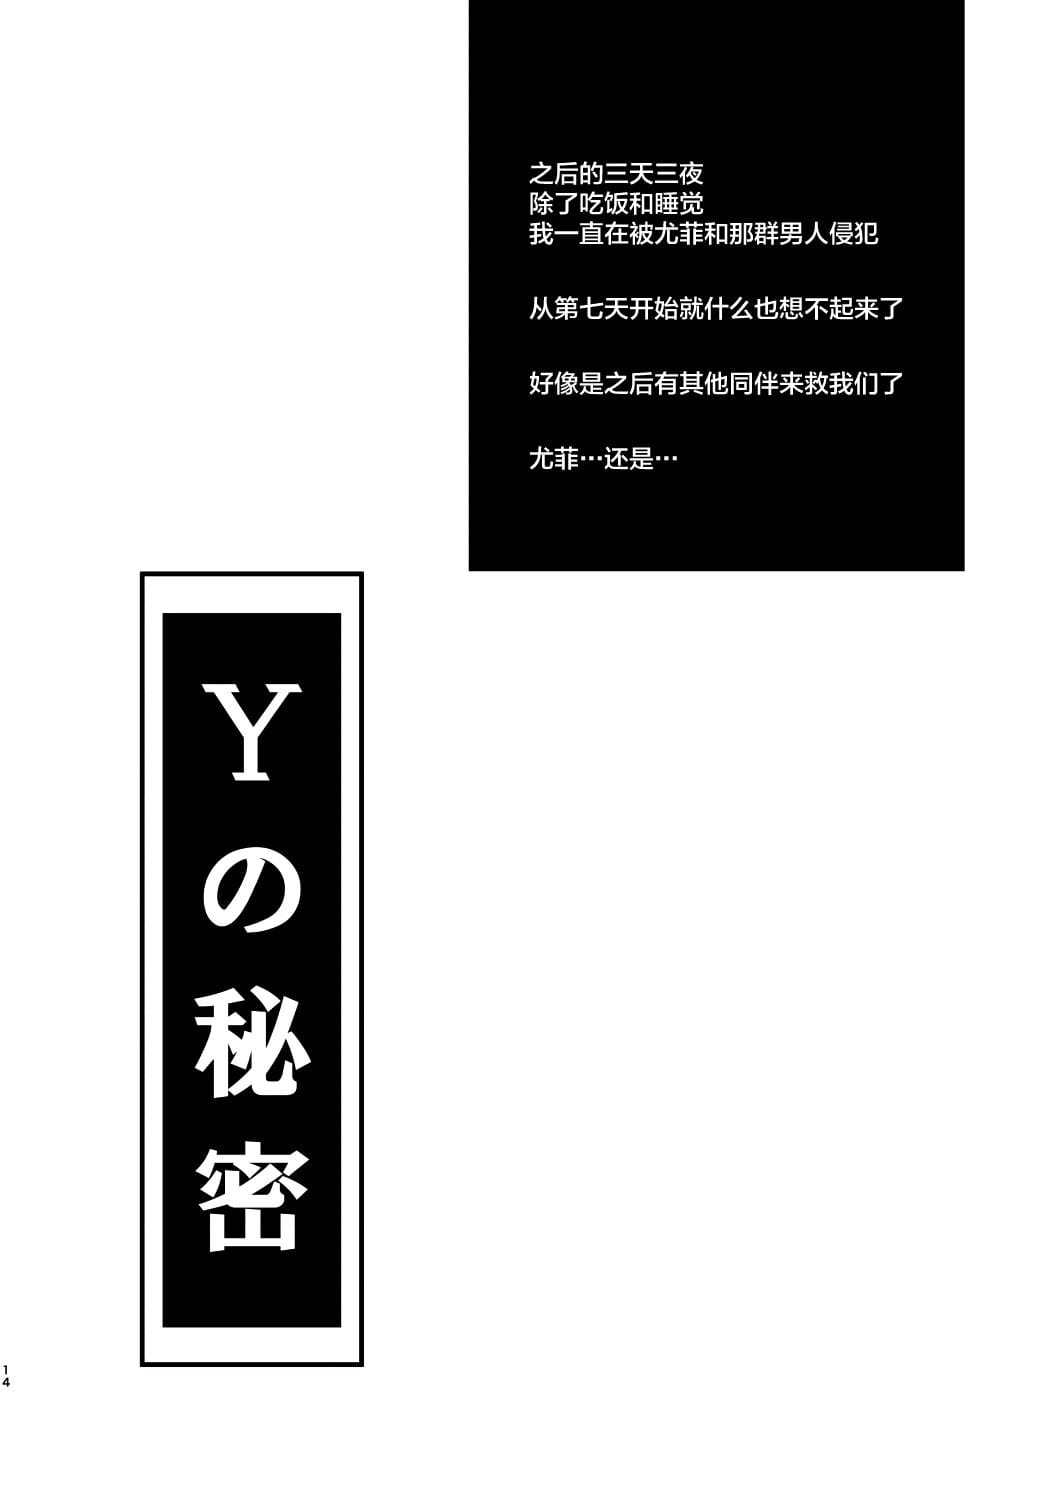 t&y オムニバス page 1